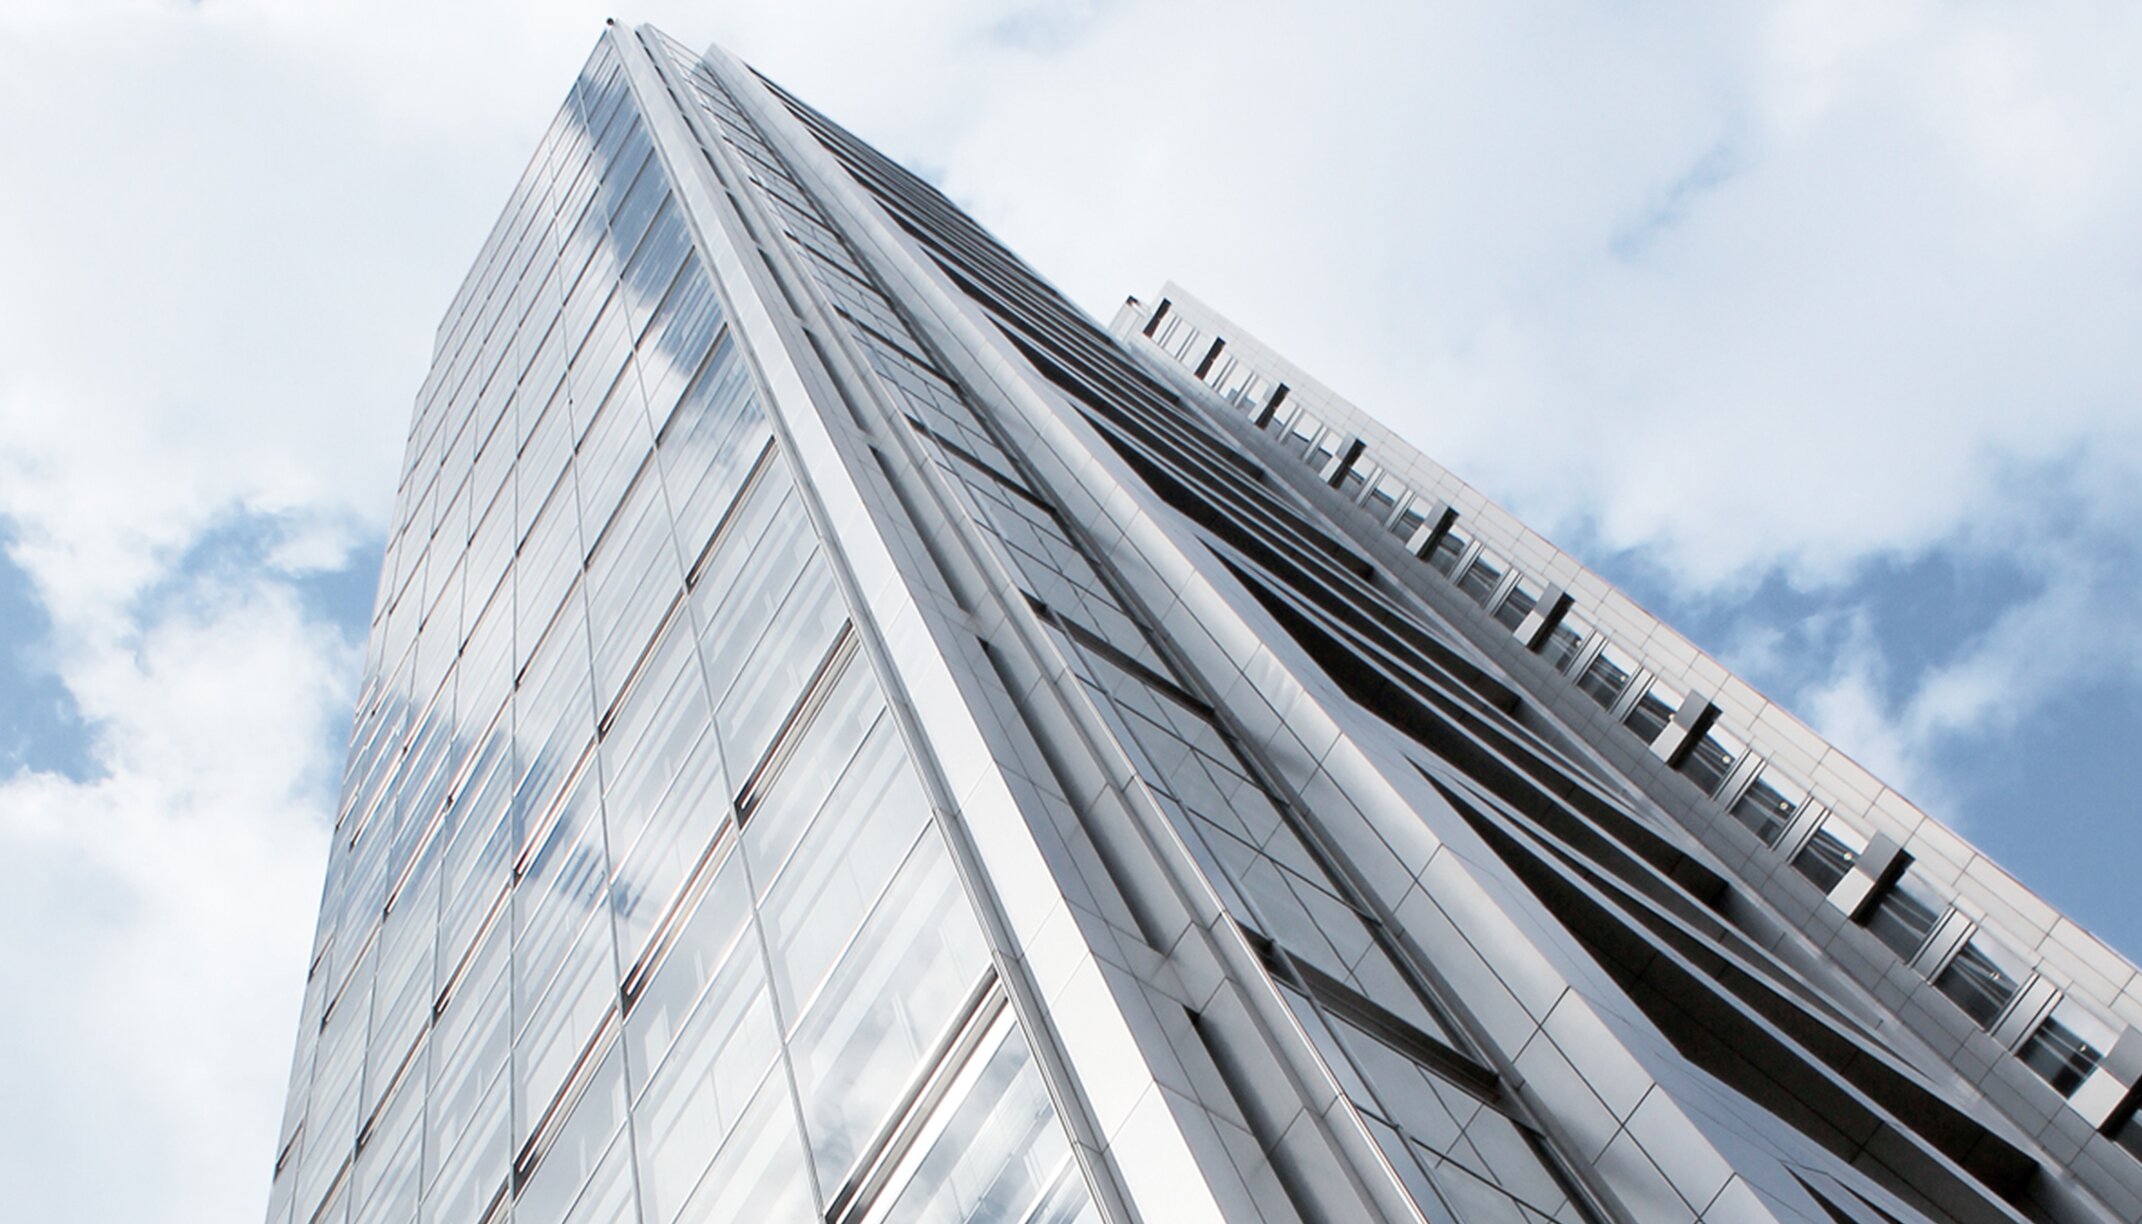 "Heron Tower"; stainless steel facade system by POHL